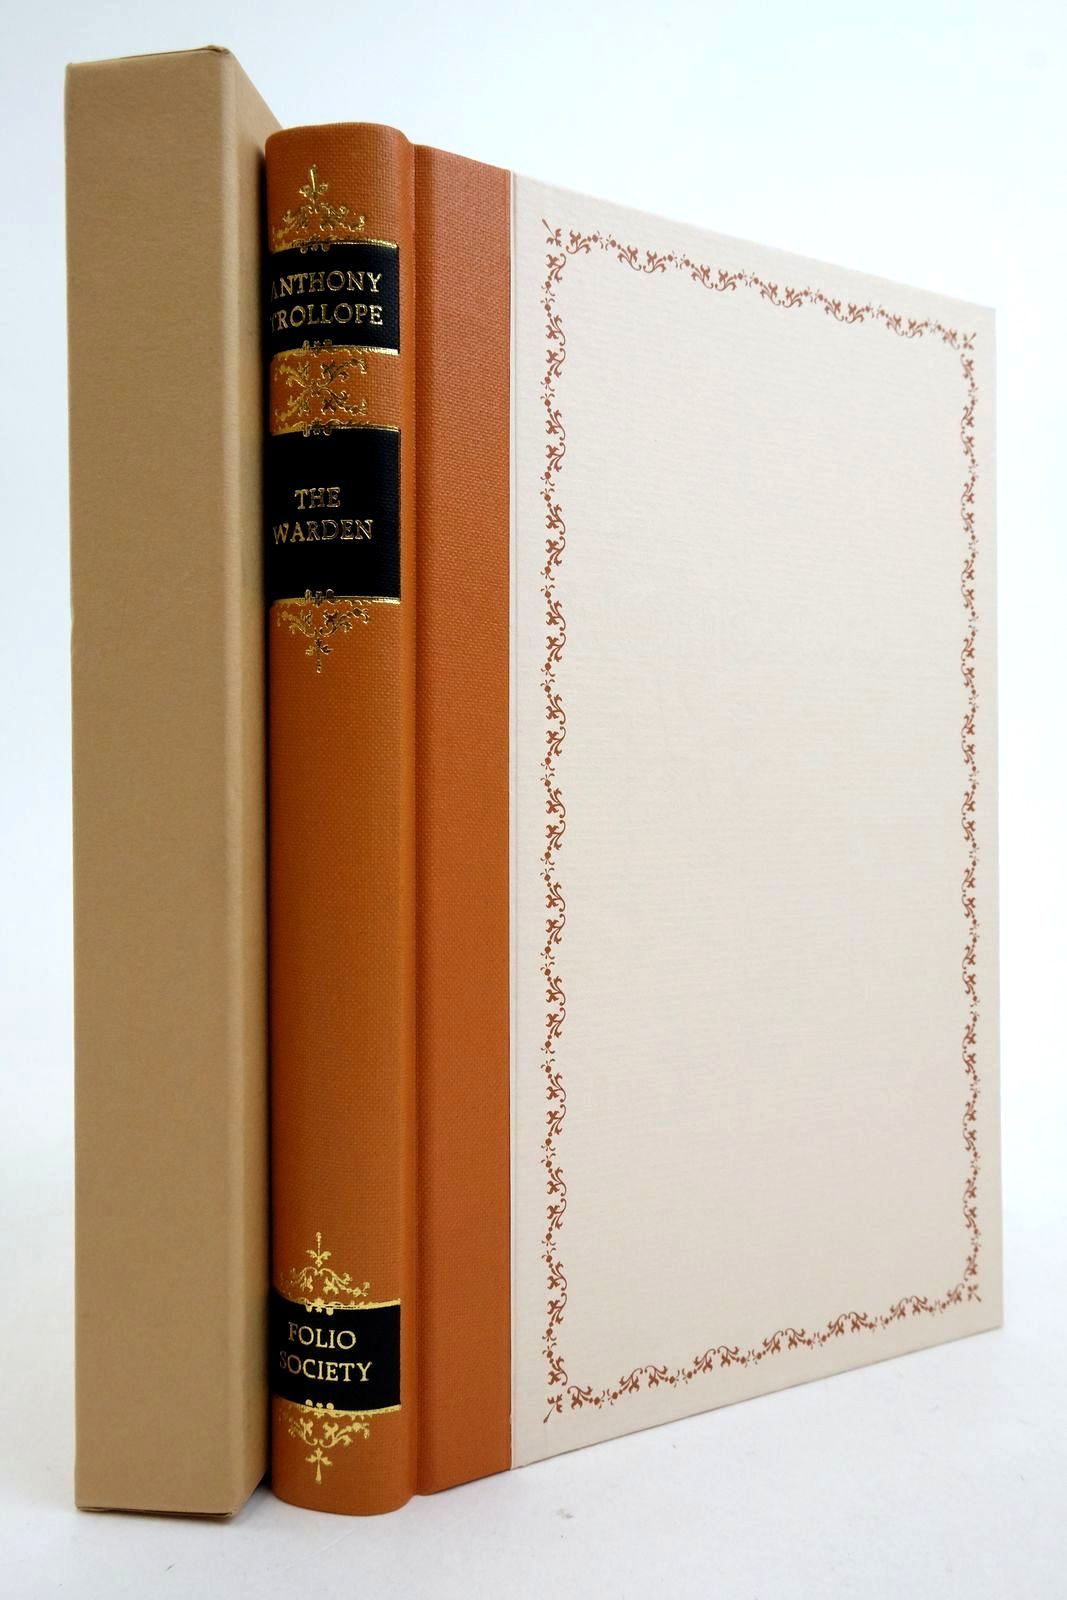 Photo of THE WARDEN written by Trollope, Anthony illustrated by Pendle, Alexy published by Folio Society (STOCK CODE: 2138278)  for sale by Stella & Rose's Books